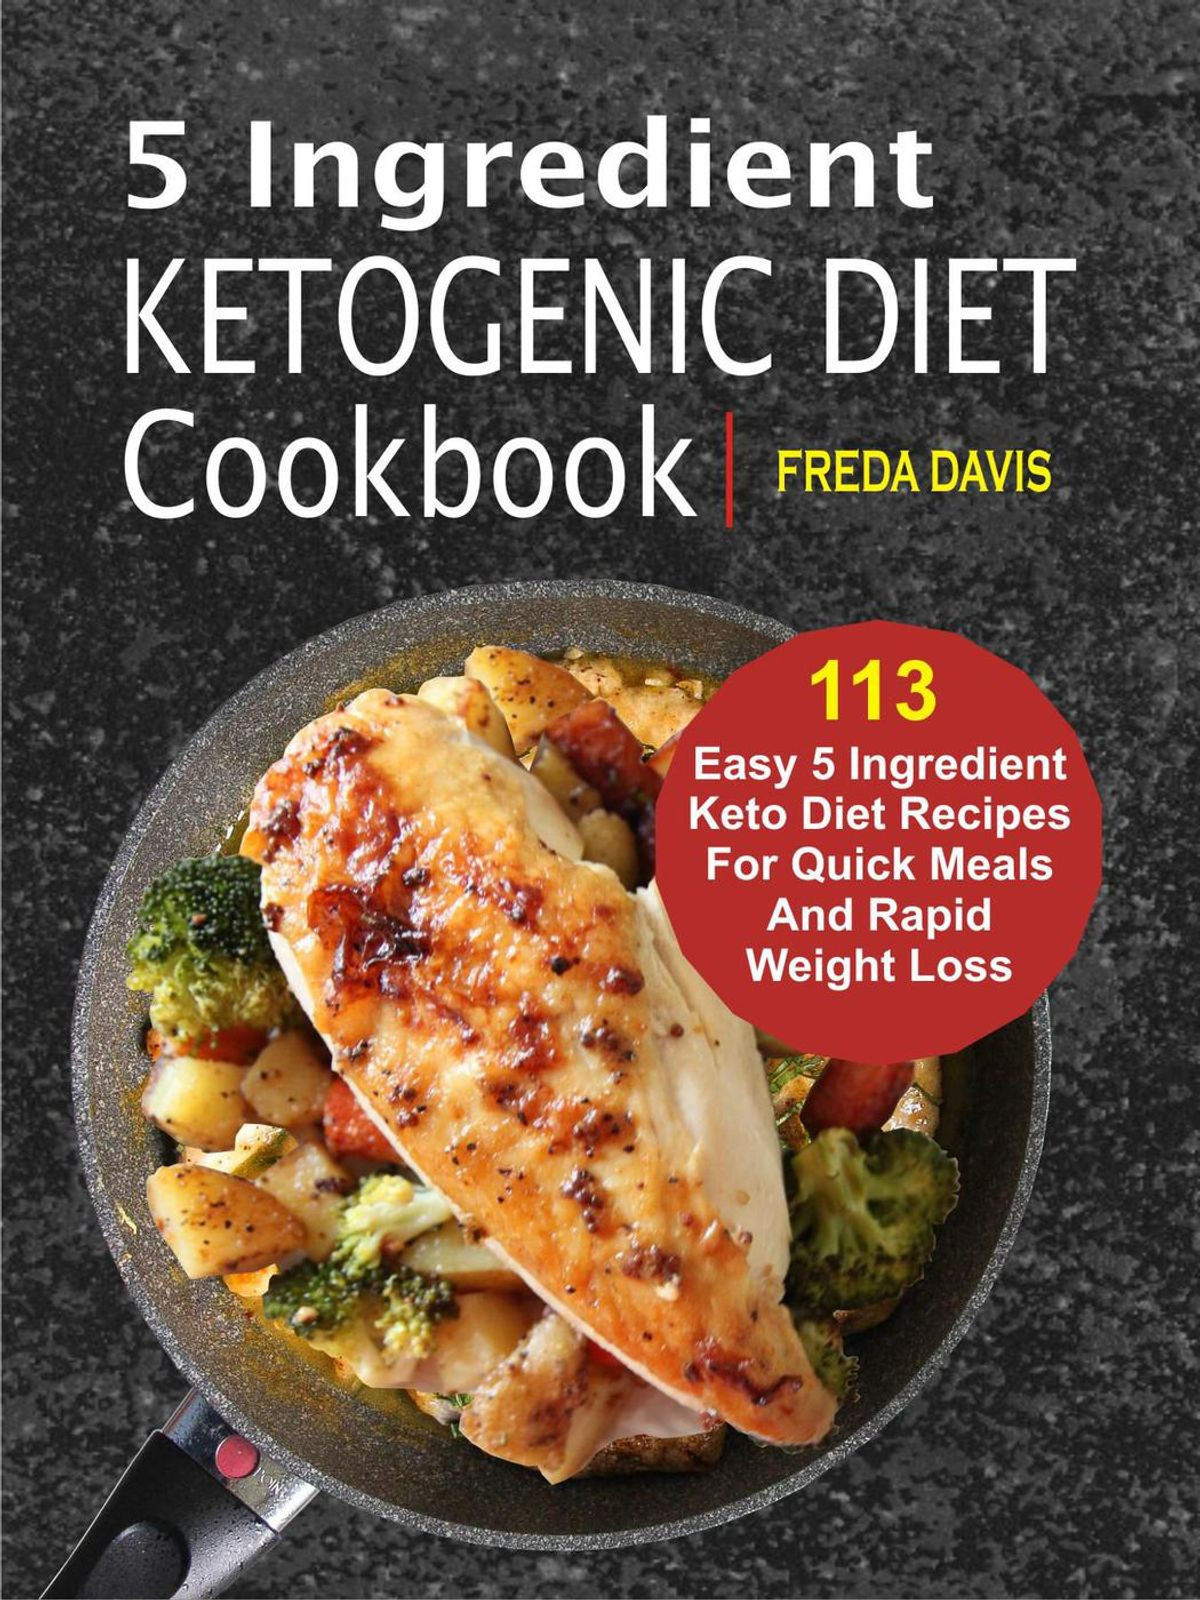 Ketogenic Diet Recipes Weight Loss
 5 Ingre nt Ketogenic Diet Cookbook 113 Easy 5